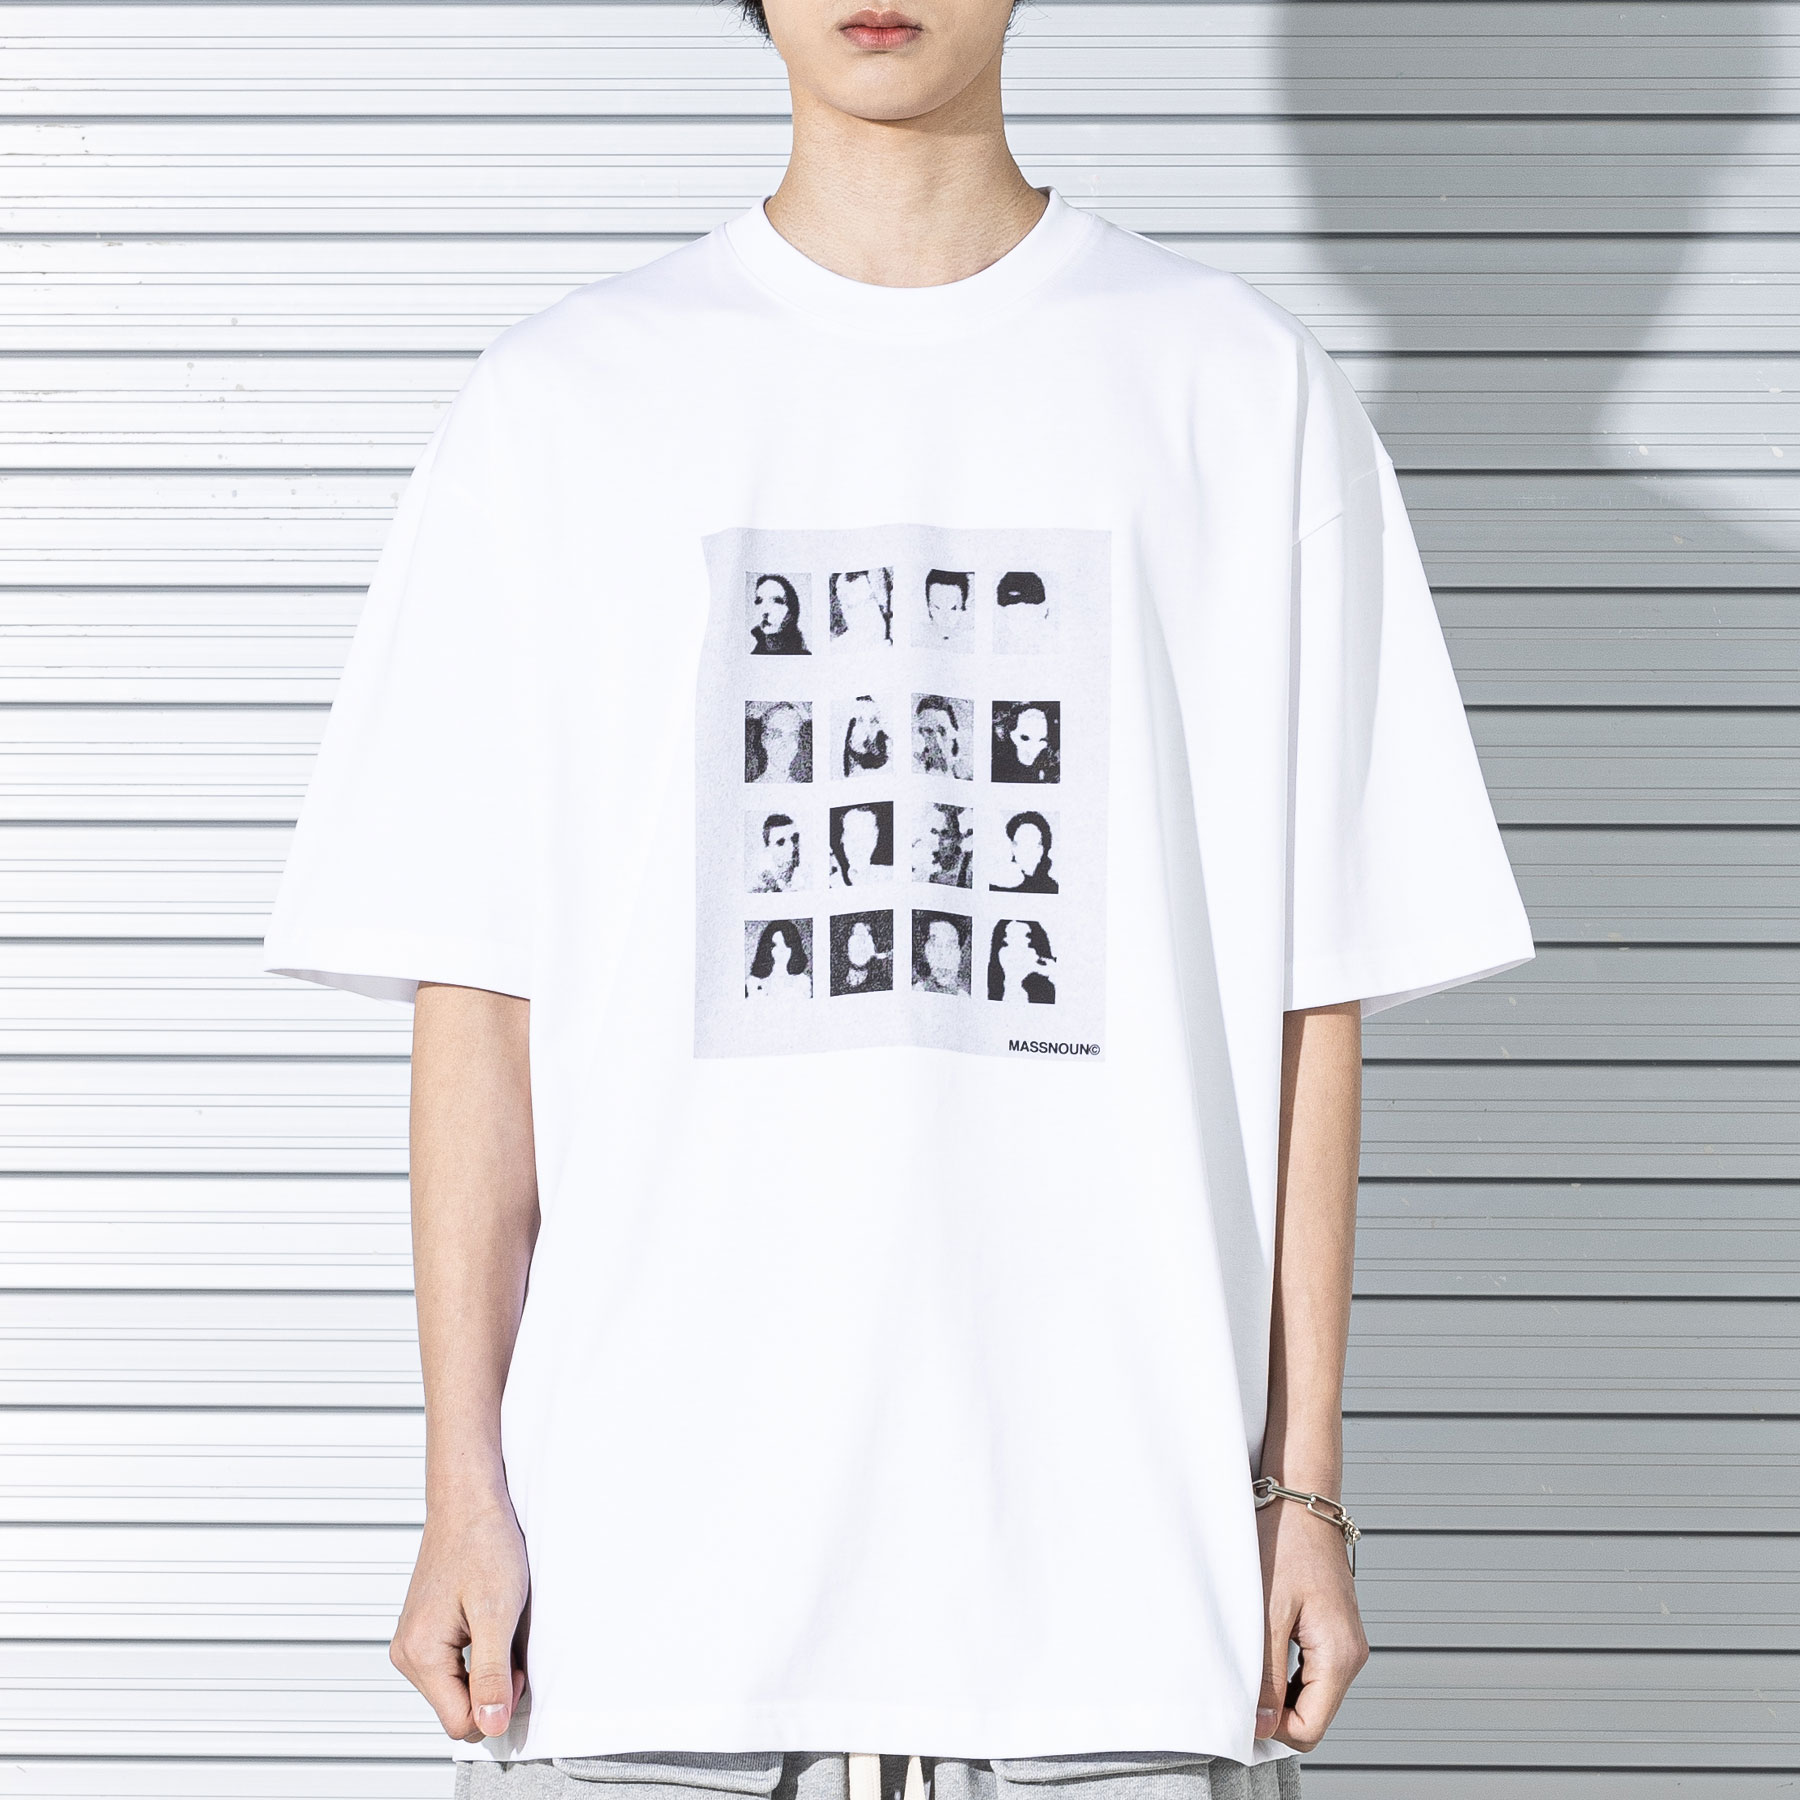 MONO GALLERY OVERSIZED T-SHIRTS MSTTS003-WT